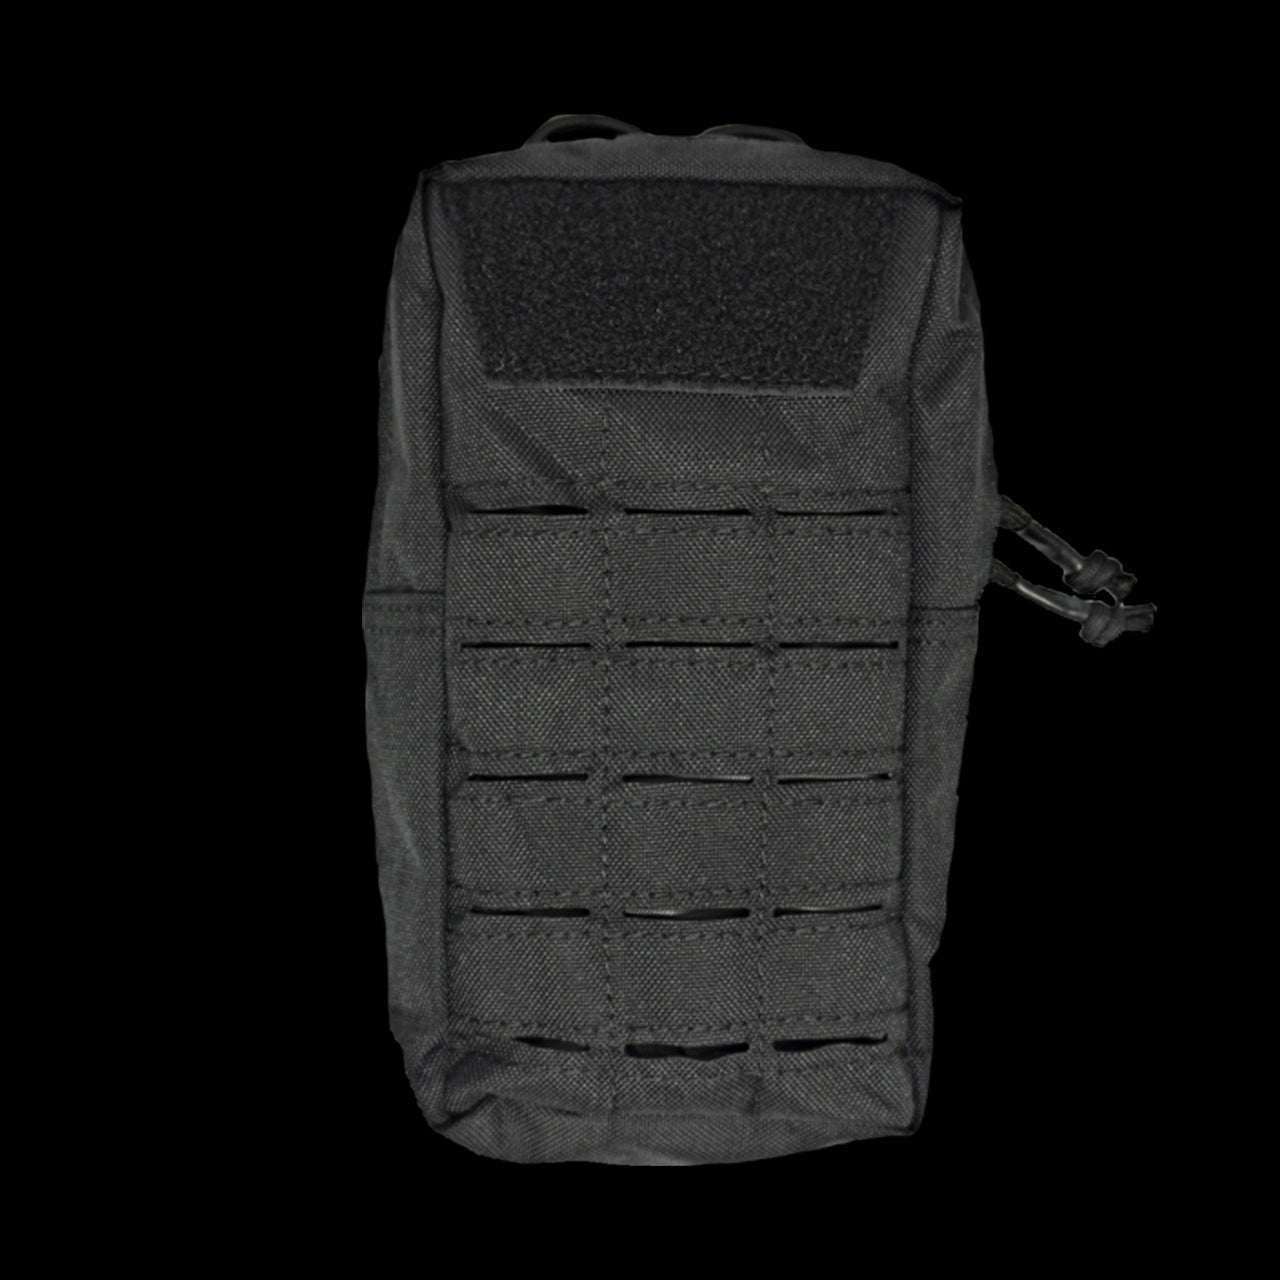 CM02 Communications Pouch - FORTITUDE WORKS SINGAPORE